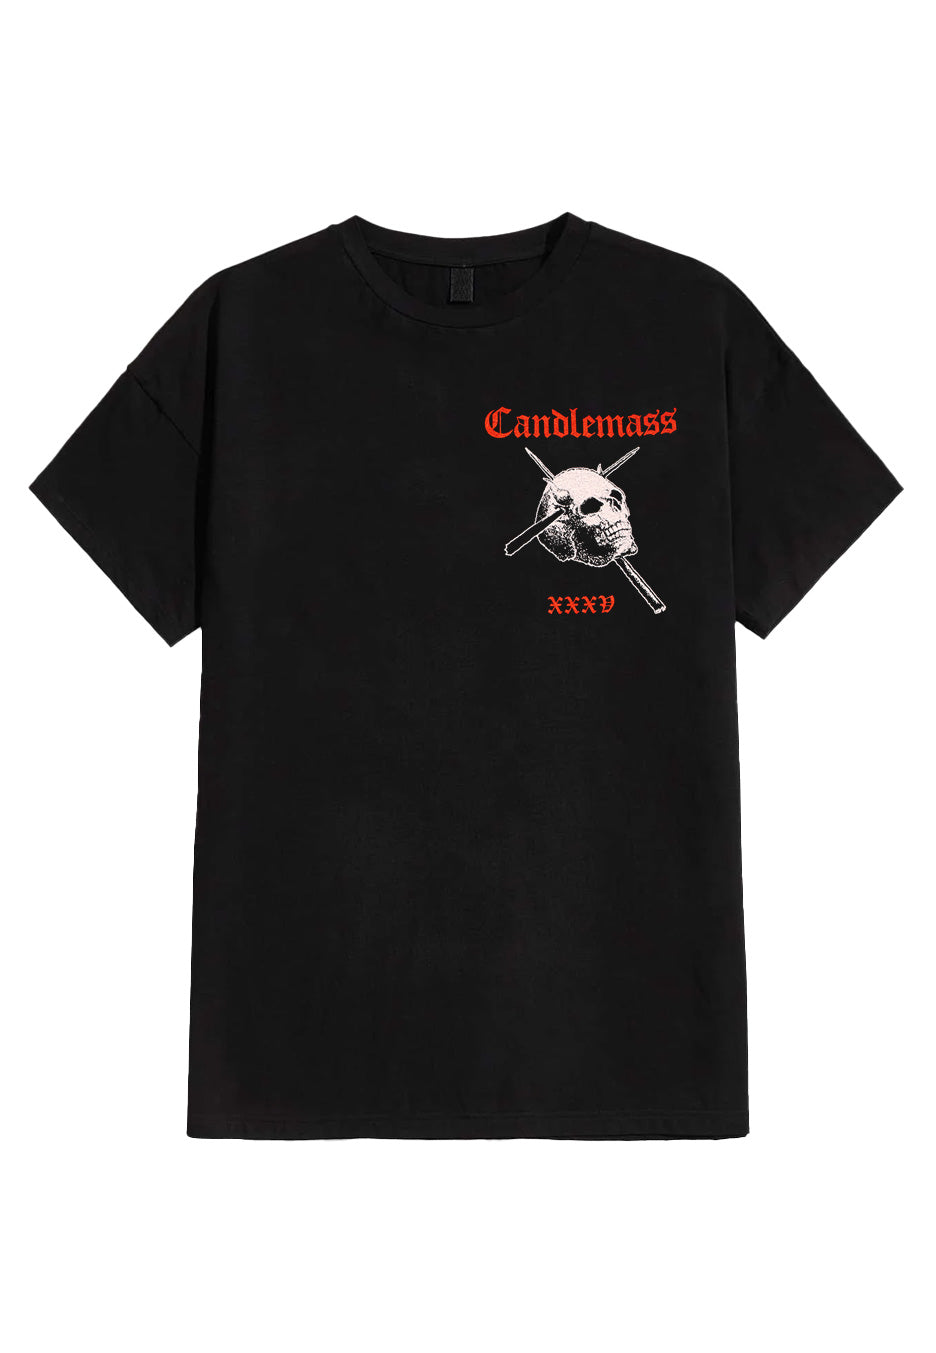 Candlemass - Epicus 35th Anniversary - T-Shirt